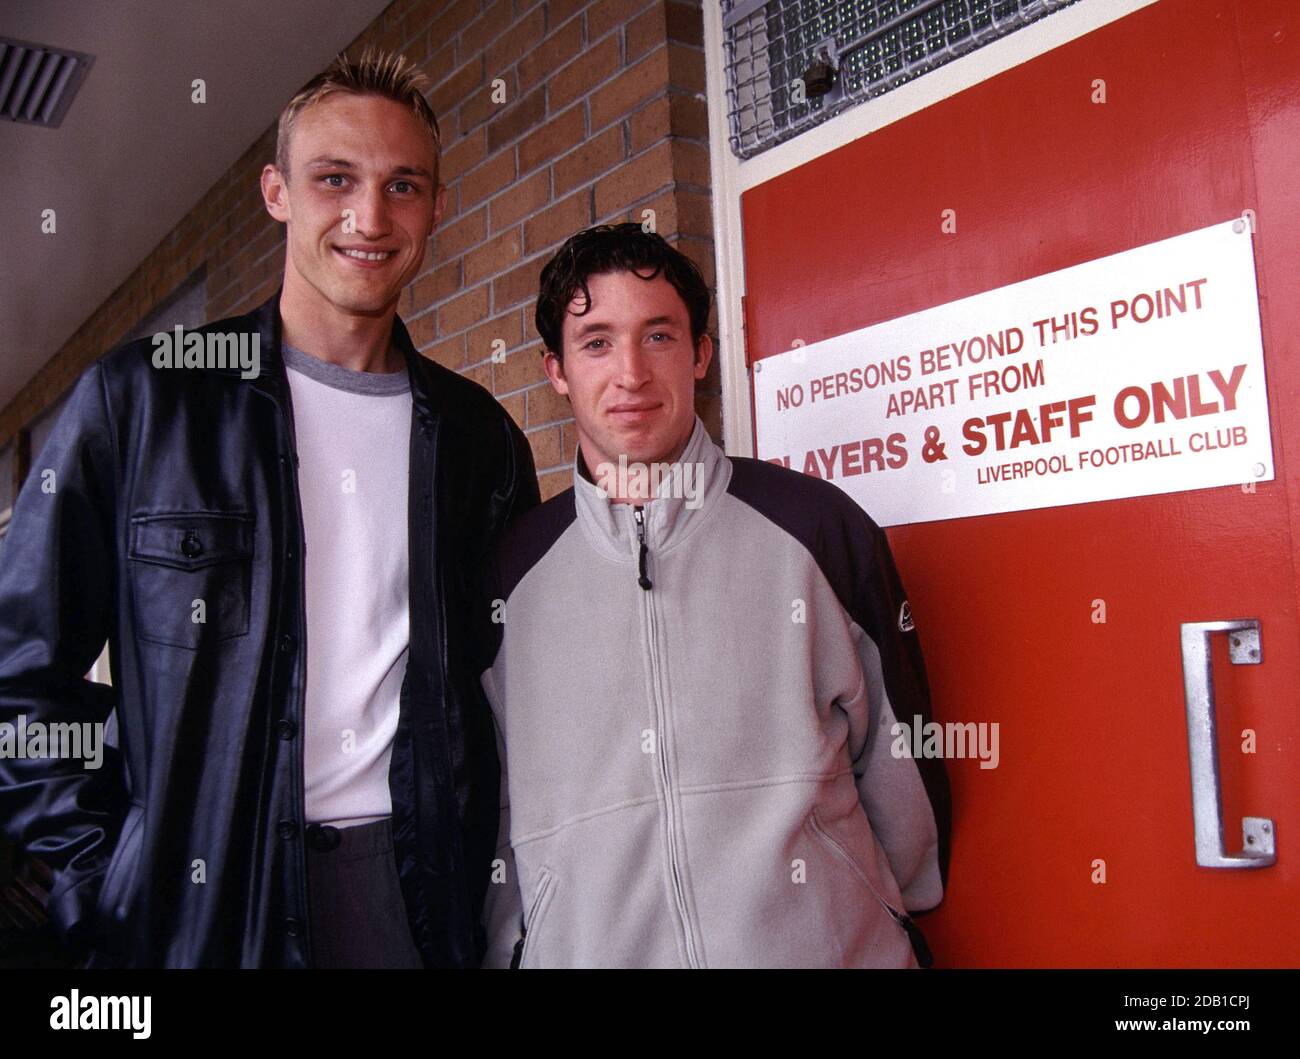 The Finnish footballer player Sami Hyypiä with Robbie Fowler in Liverpool in 2000 after signing with the Liverpool FC in 1999. Stock Photo